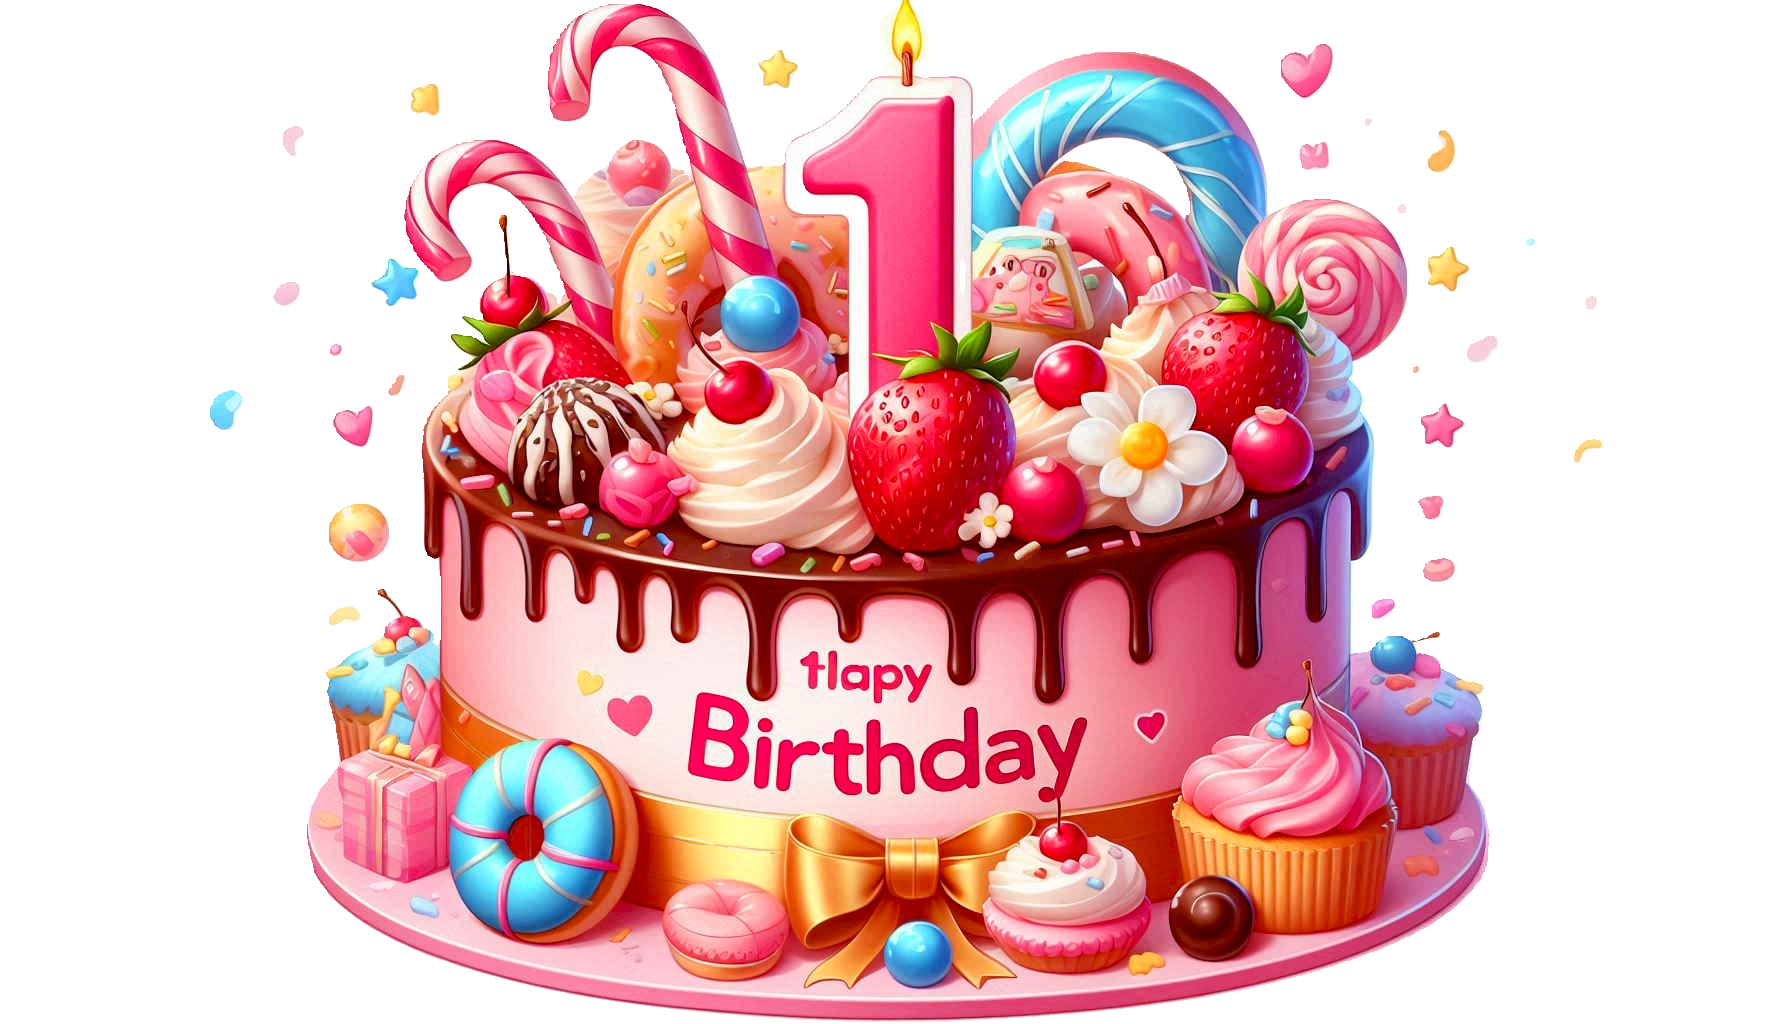 Download Free Happy Birthday Cake PNG image for a 1-year-old for Websites, Slideshows, and Designs | Royalty-Free and Unlimited Use.